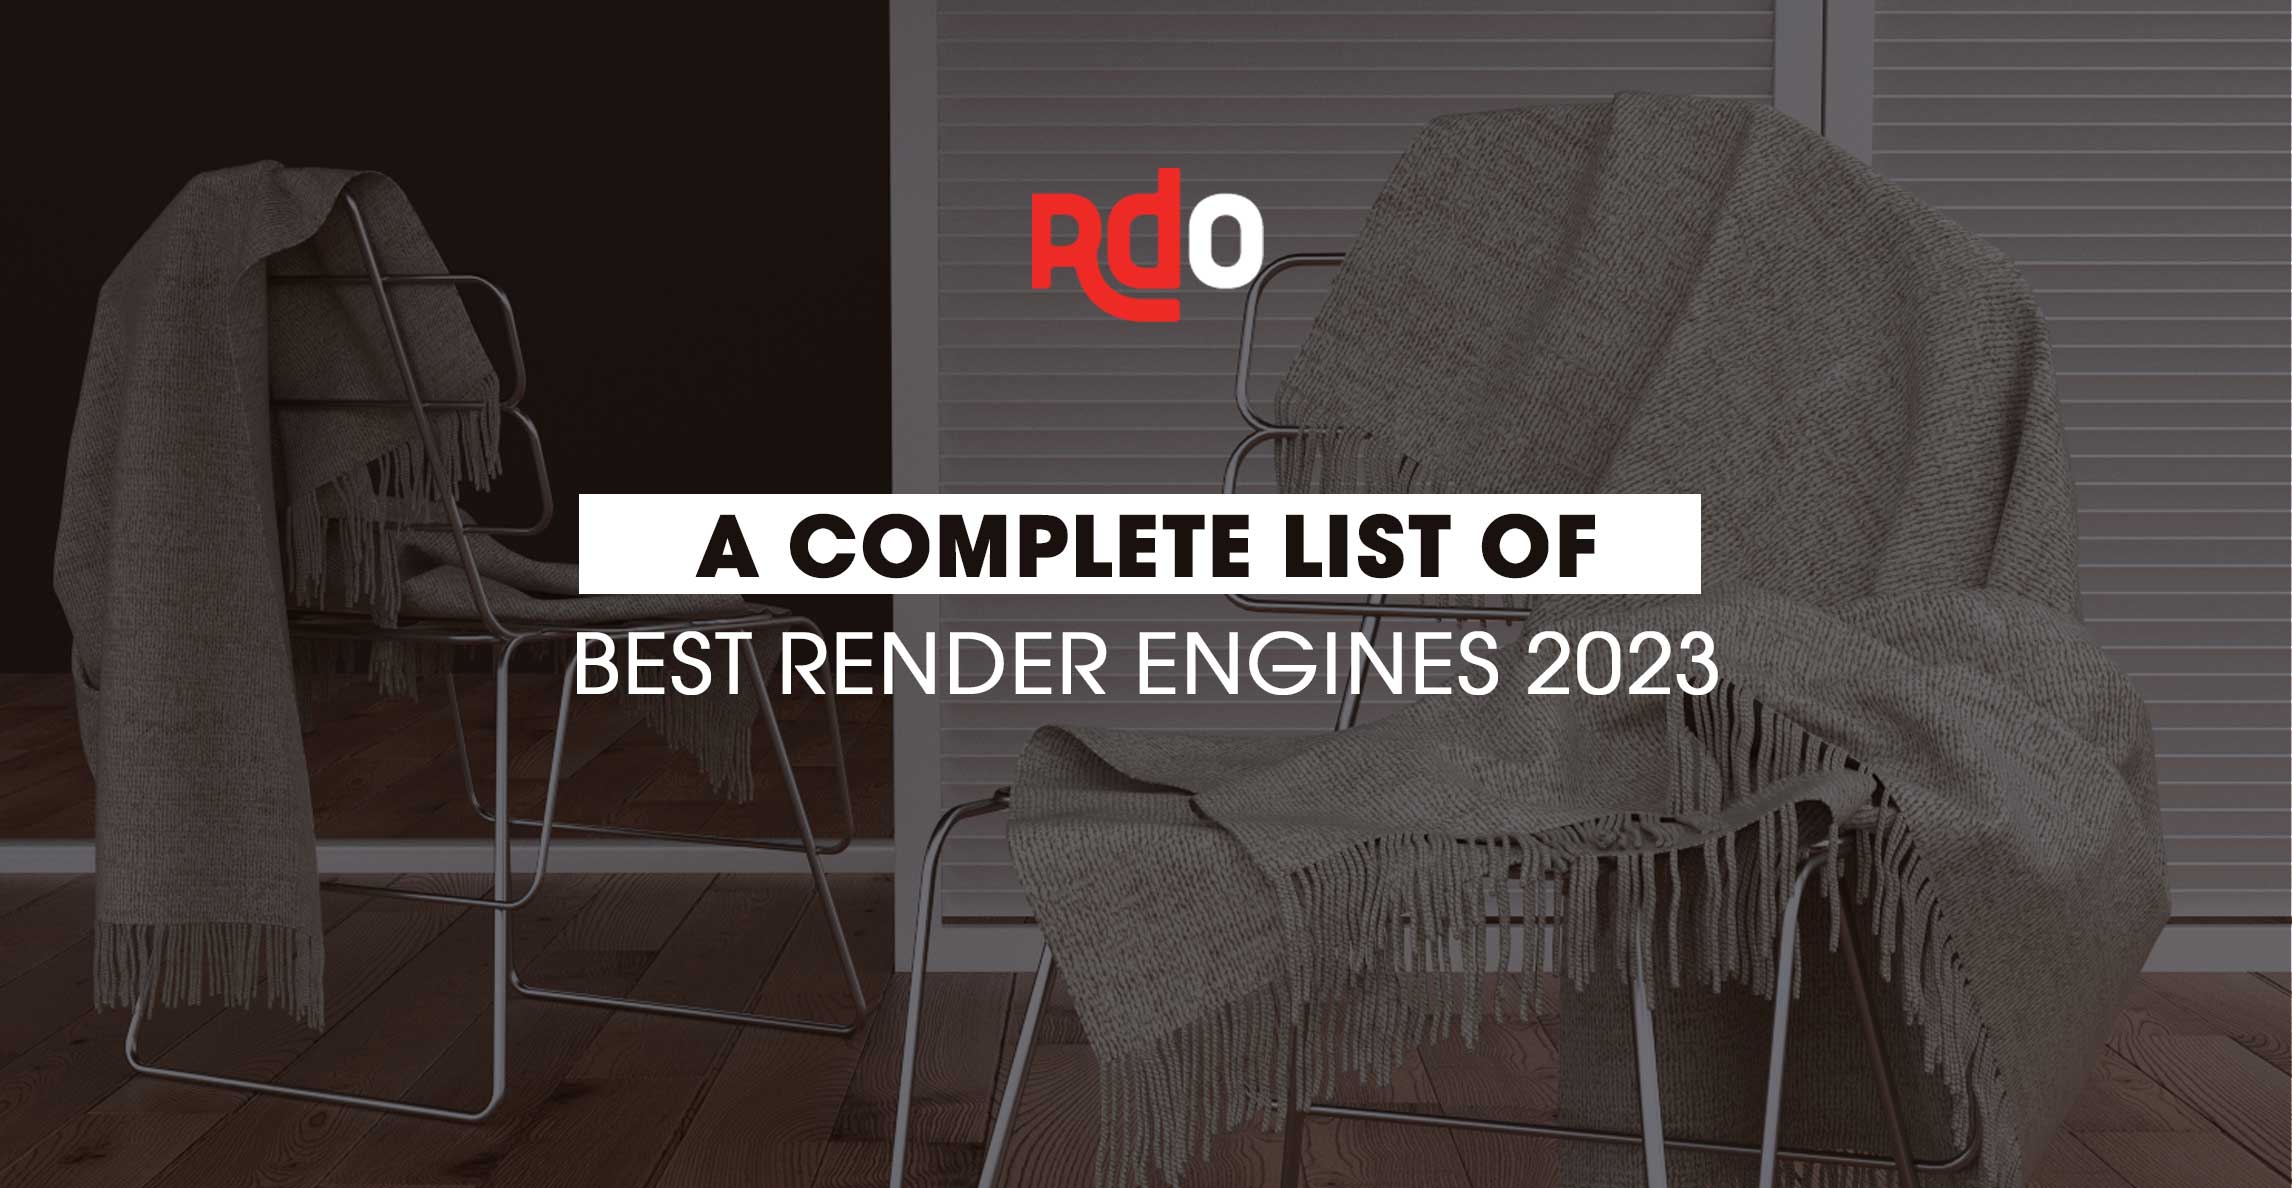 A complete list of best render engines 2023